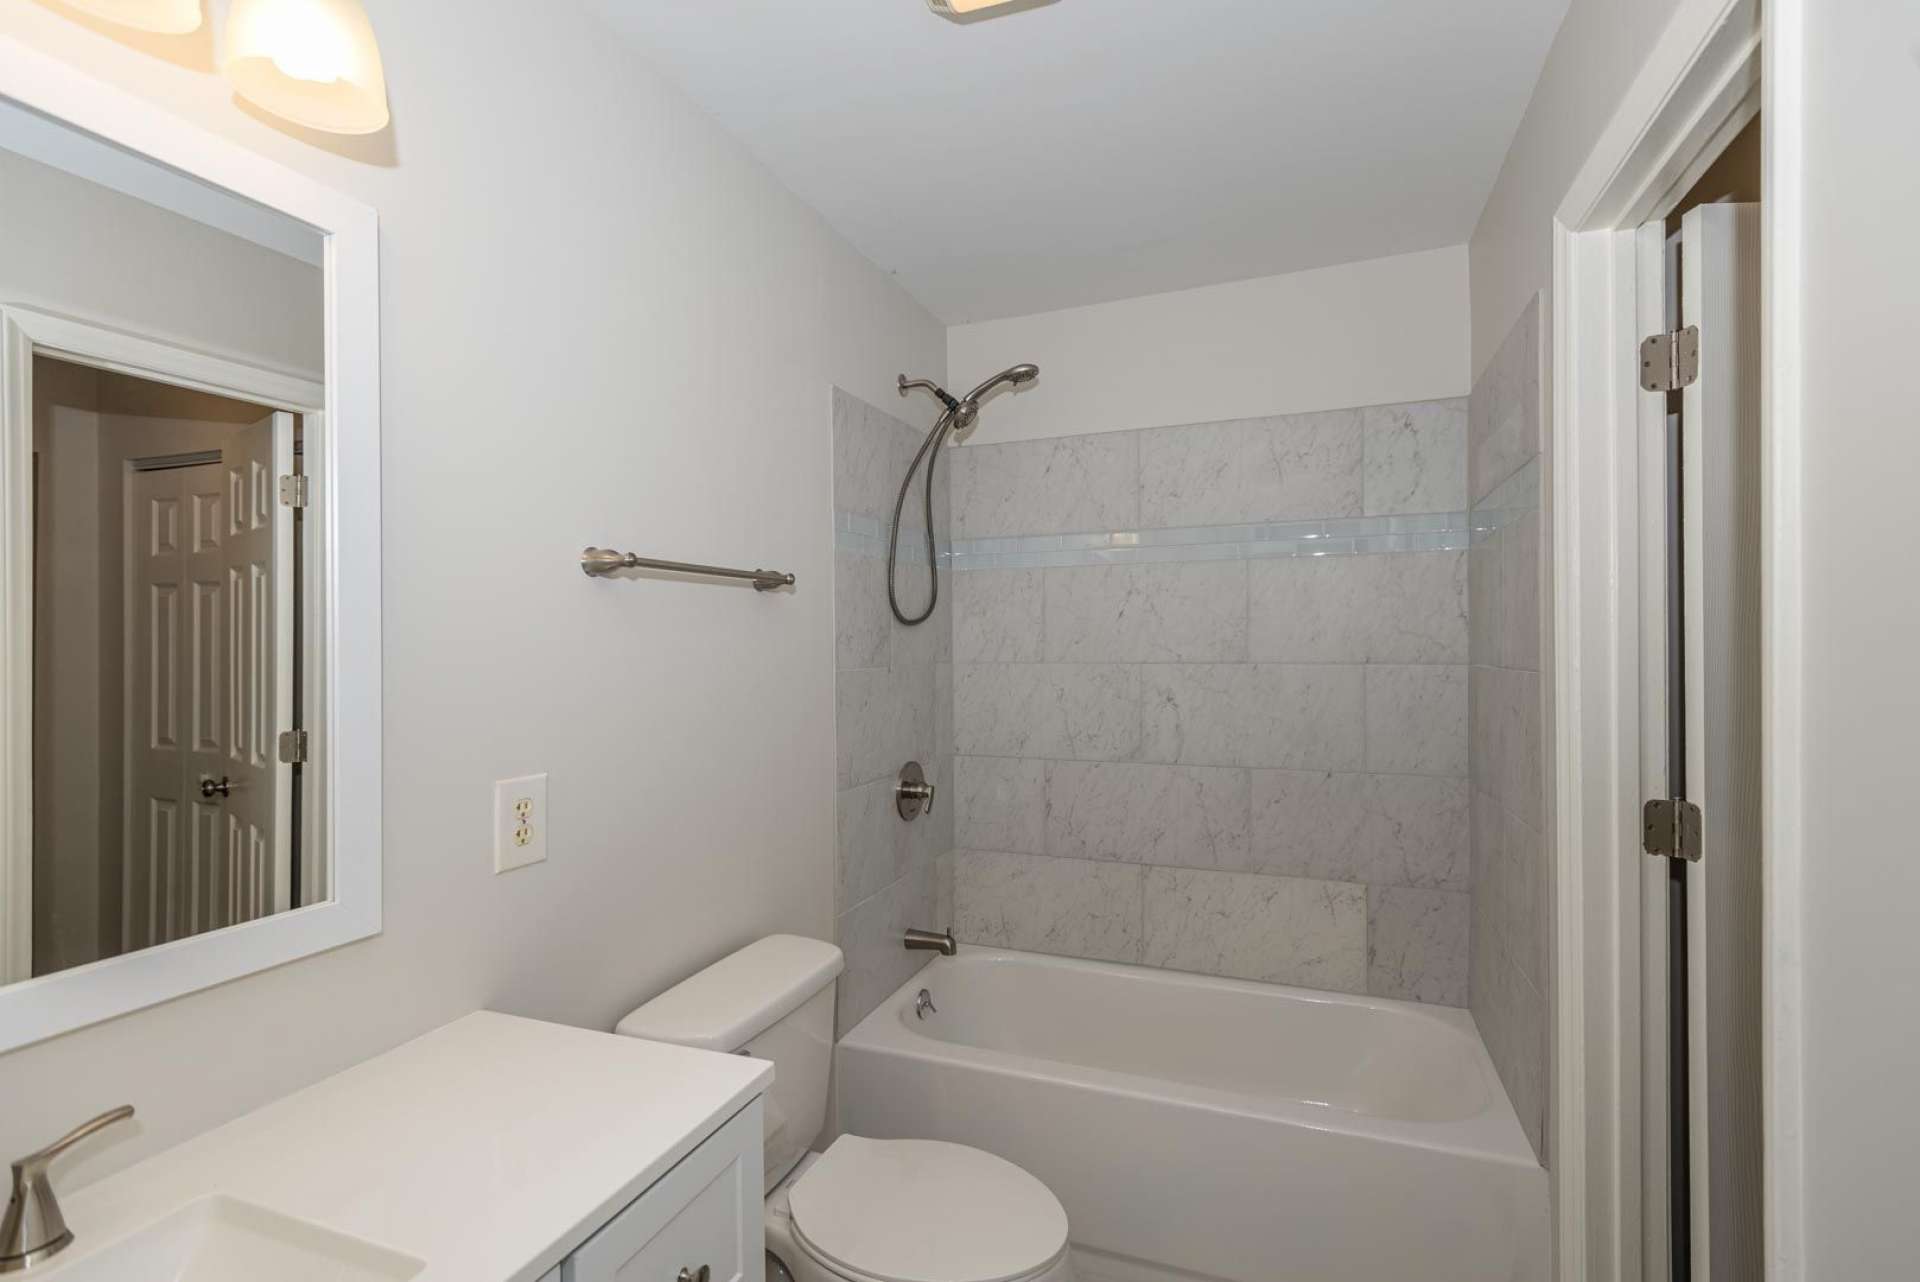 The newly updated bath features new tiled floor and tub surround, as well as new fixtures.